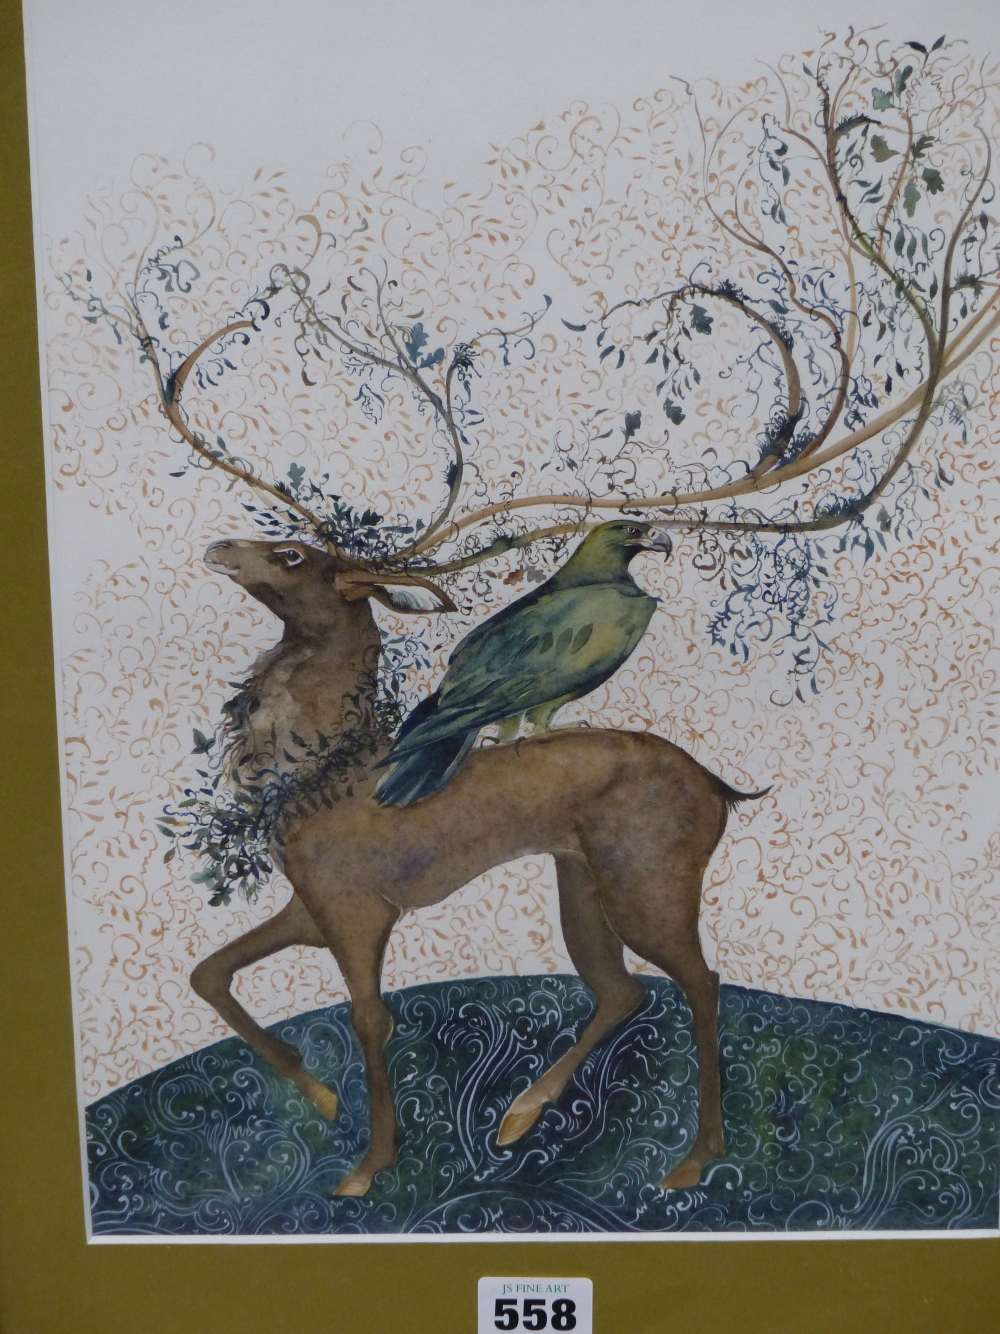 JACKIE MORRIS (20TH/21ST CENTURY) ARR, STAG AND EAGLE, WATERCOLOUR HIGHLIGHTED WITH GILT, 24.5 x - Image 2 of 8